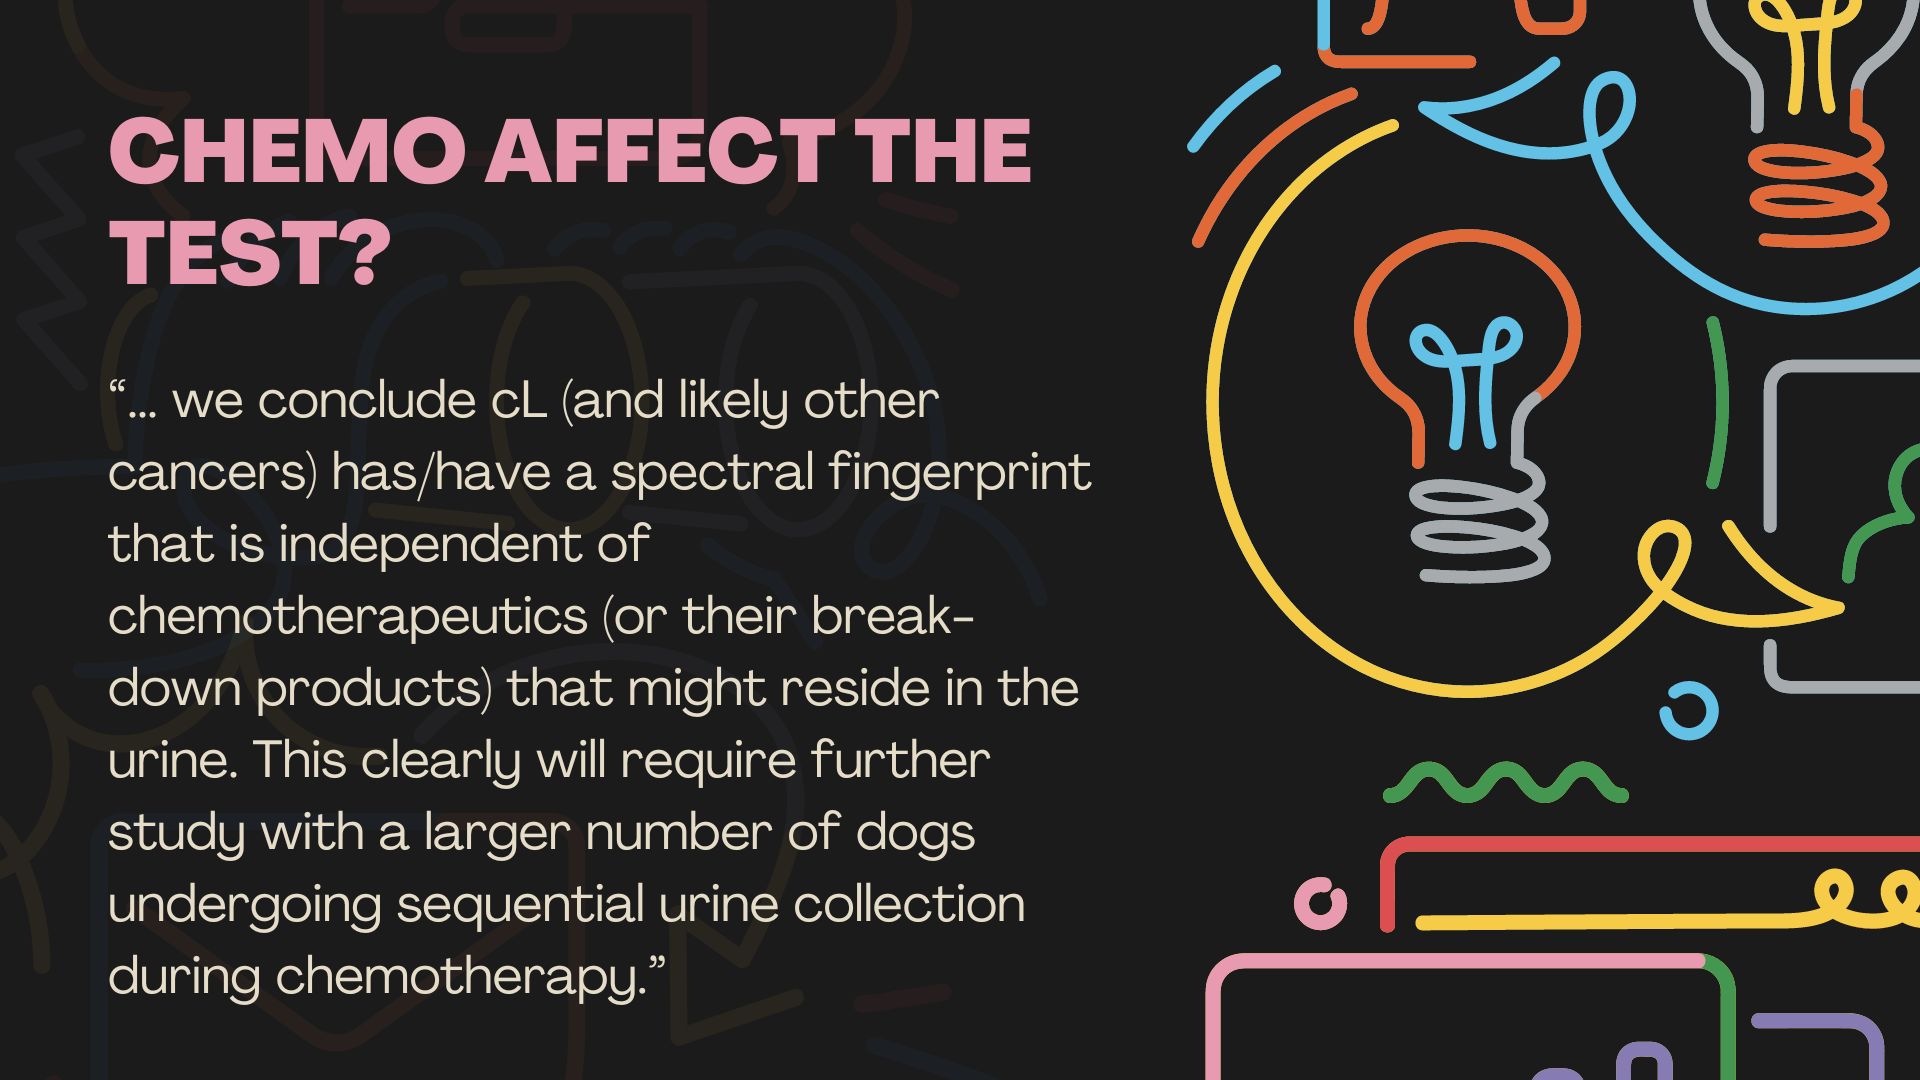 detecting dog cancers via urinalysis study quote 3-- The full text of the quote is written in full near this image in the text of the online article. 